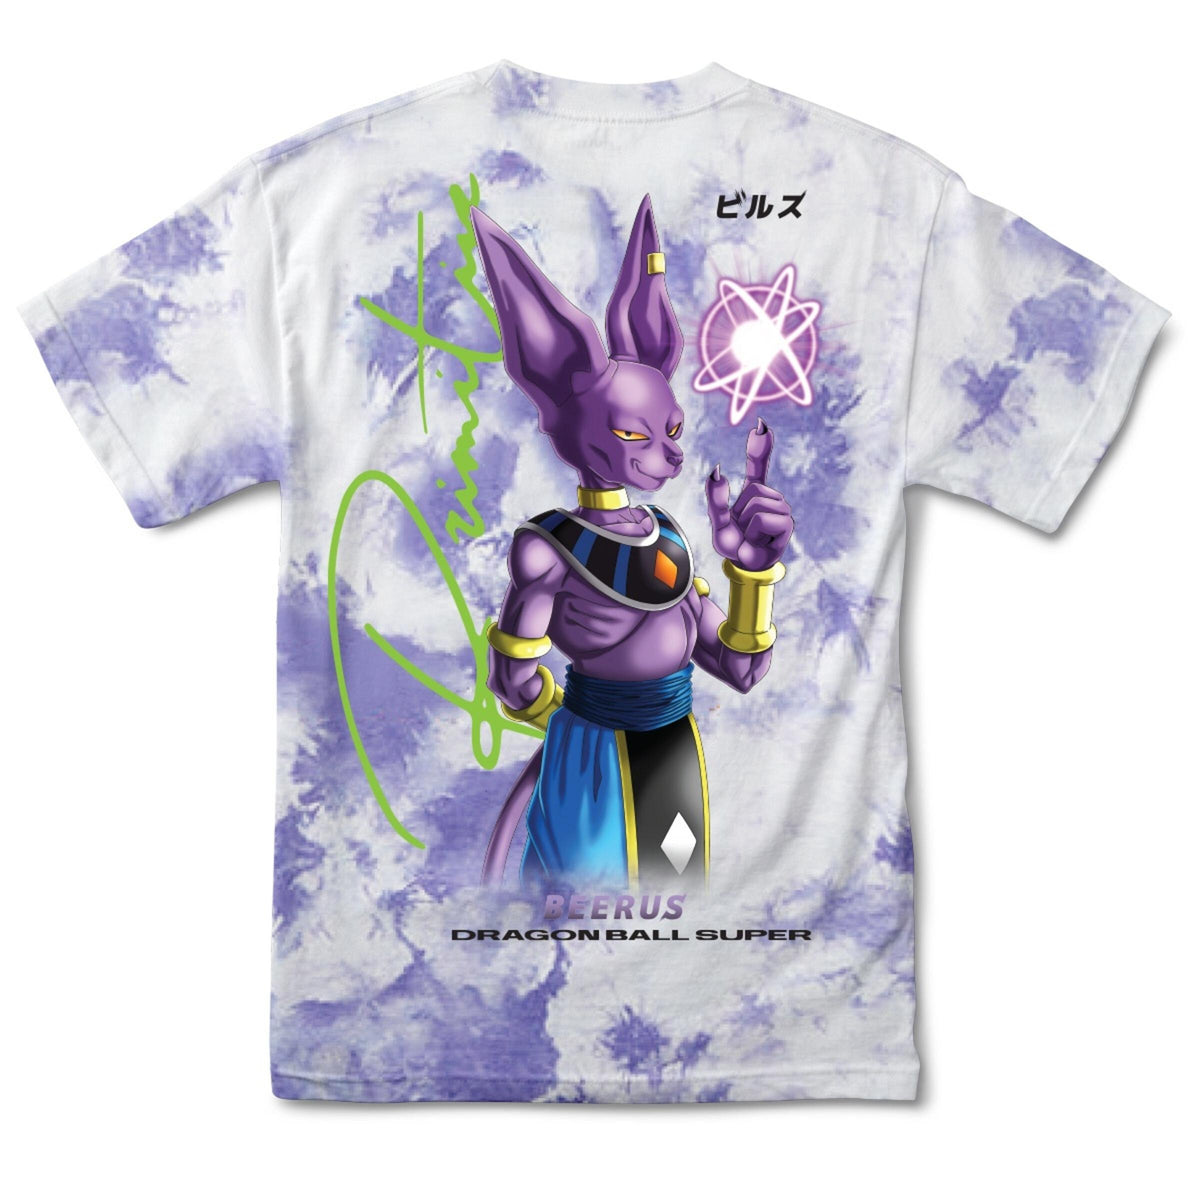 Primitive x Dragon Ball Super Beerus ORB Washed Tee (+2 colors)